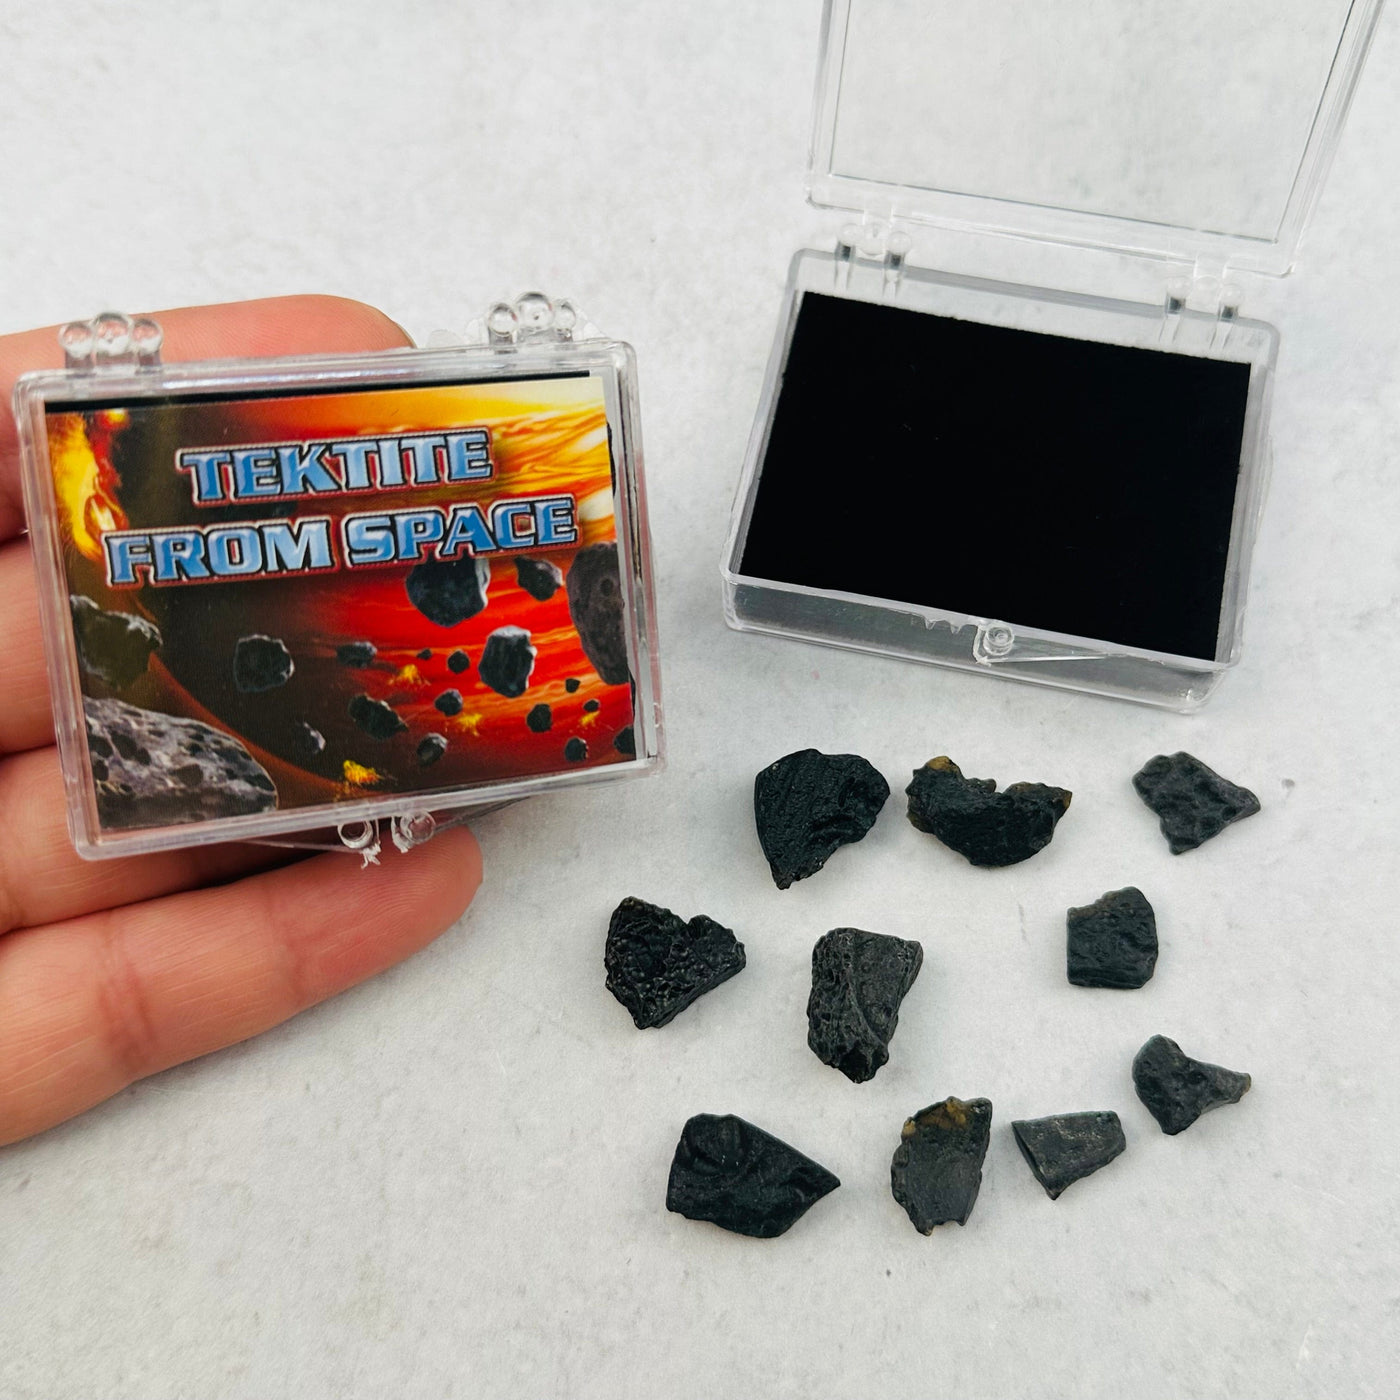 tektite from space comes in a small clear box 